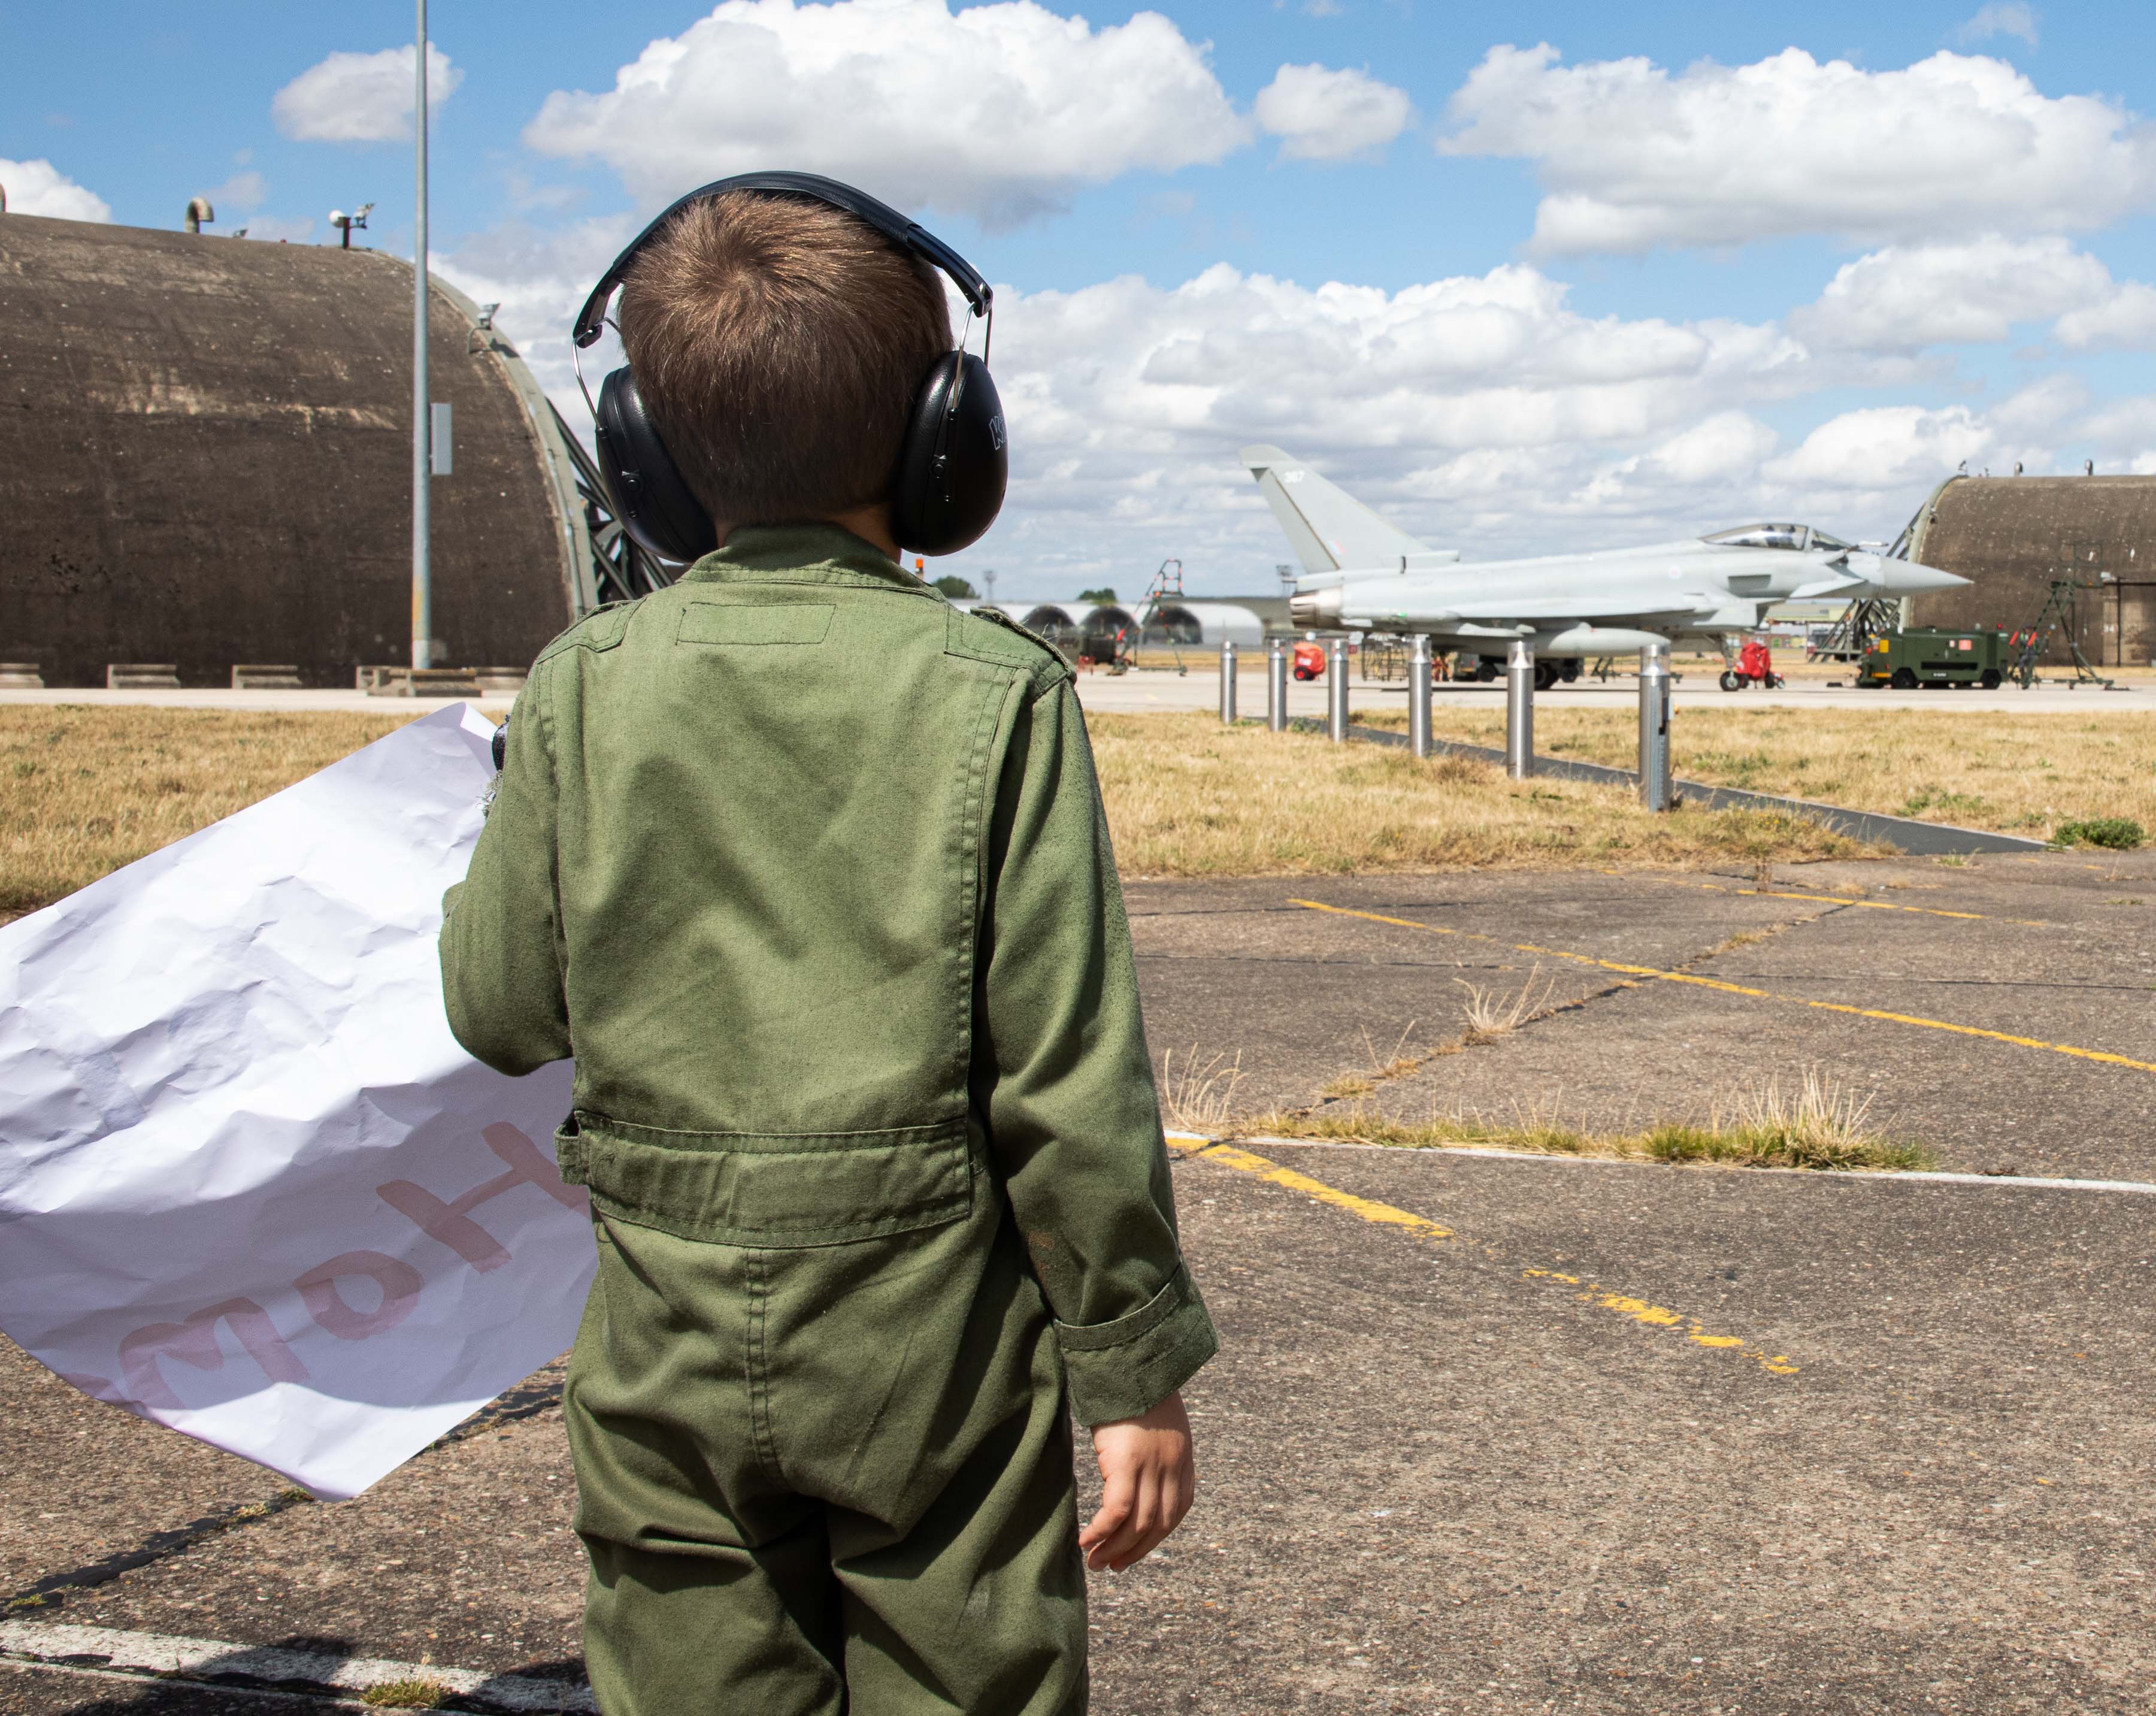 Image shows young boy holding a poster on the airfield.